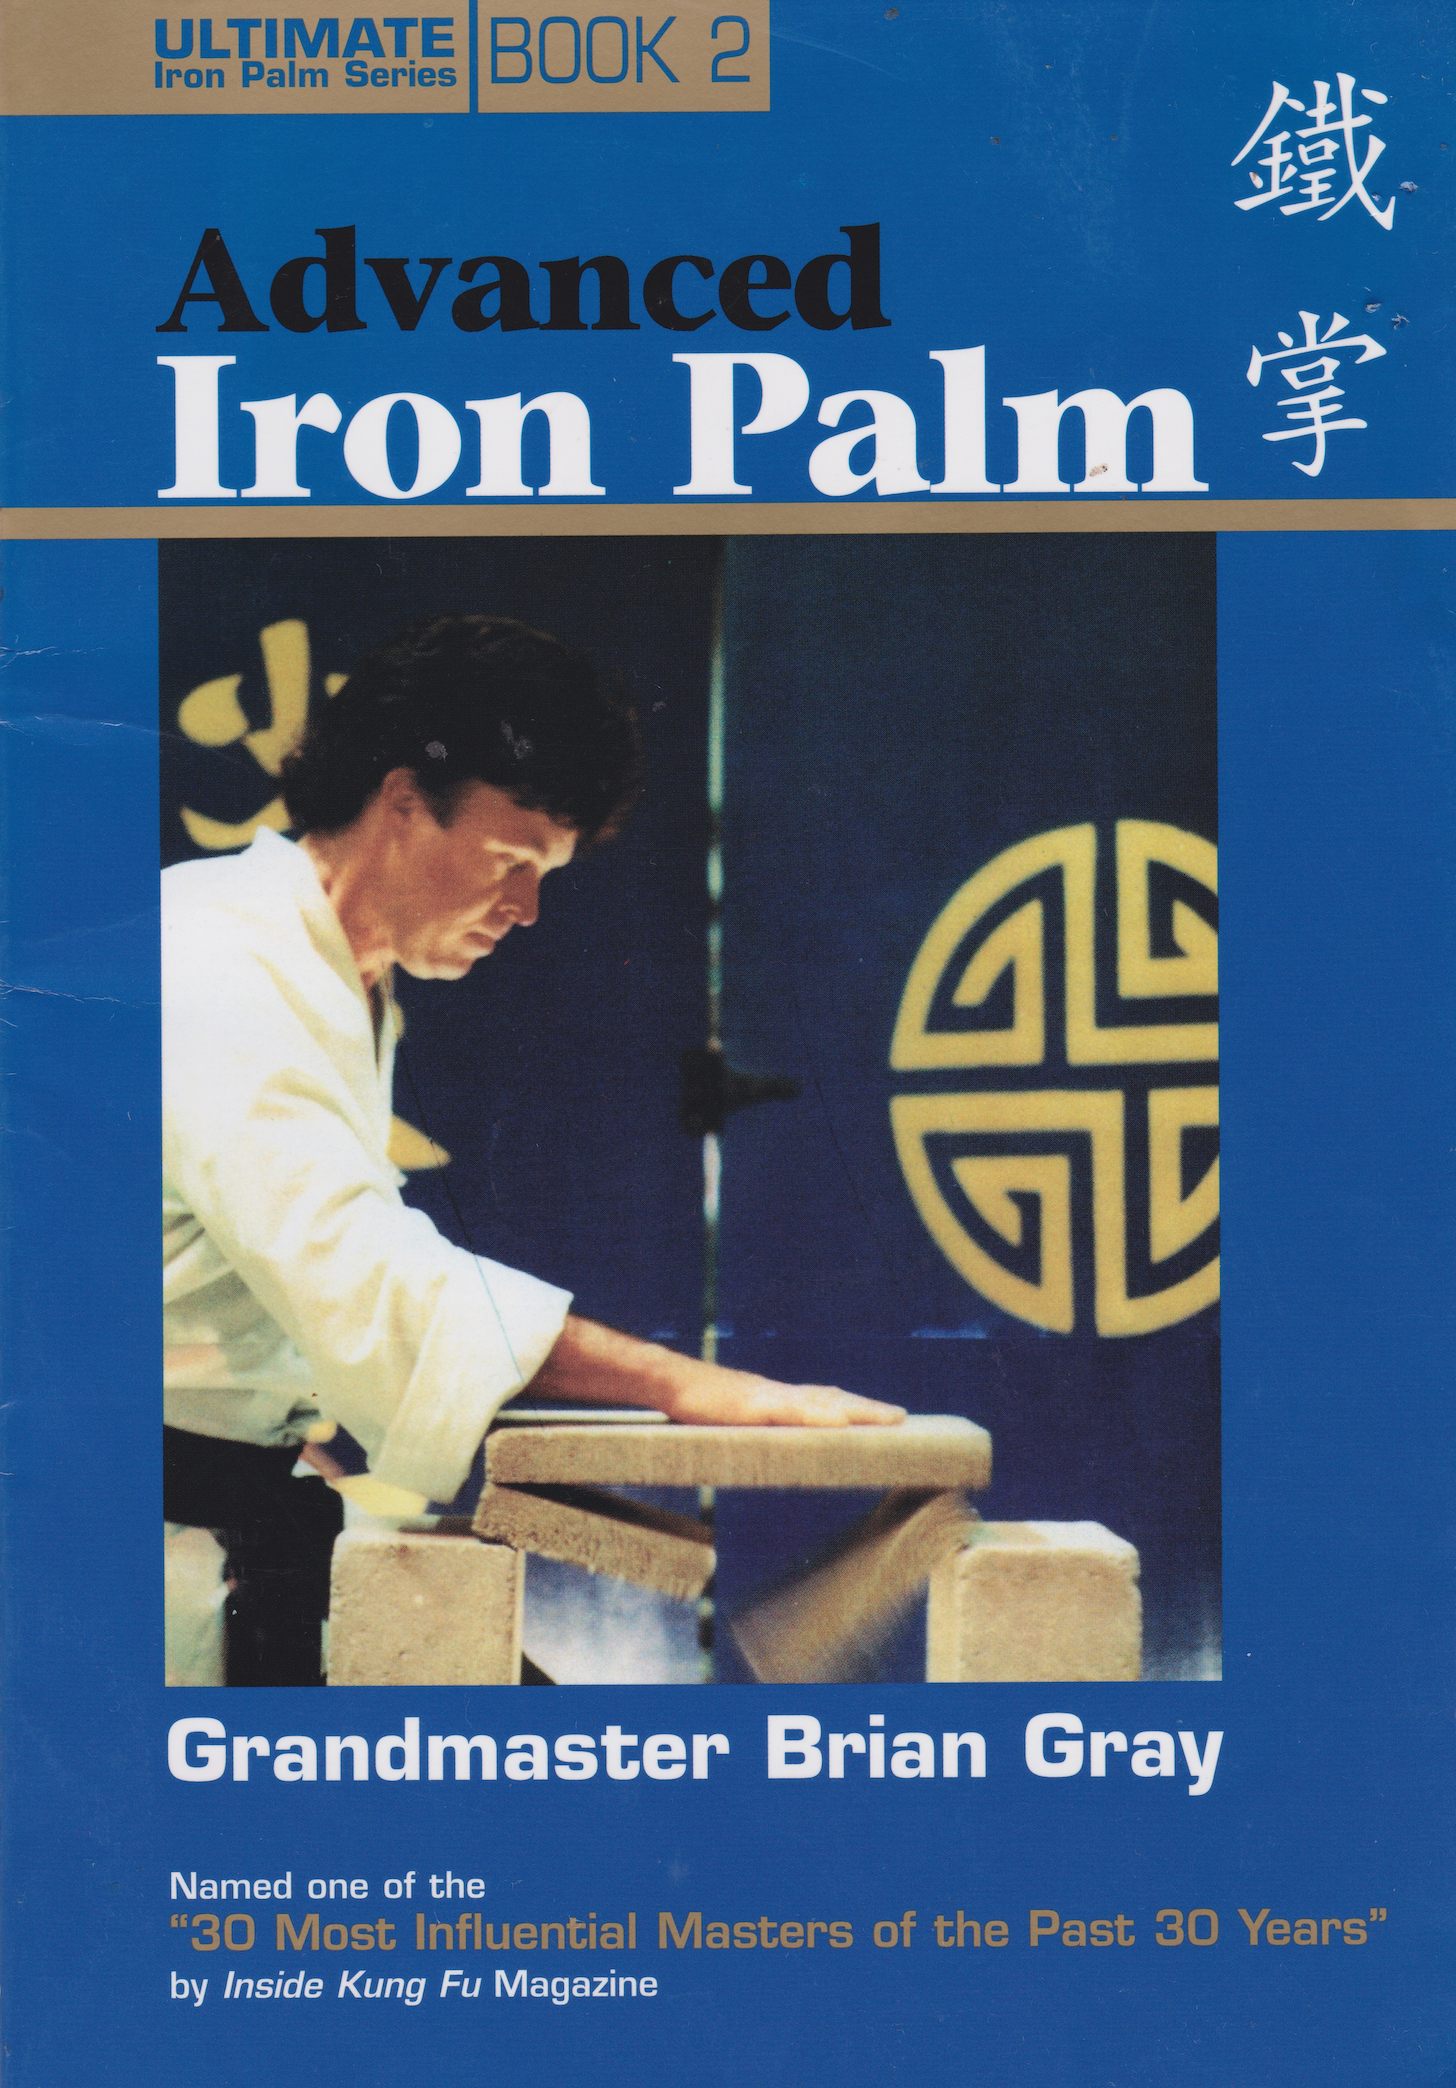 Ultimate Iron Palm Series Book 2: Advanced Iron Palm by Brian Gray (Preowned)